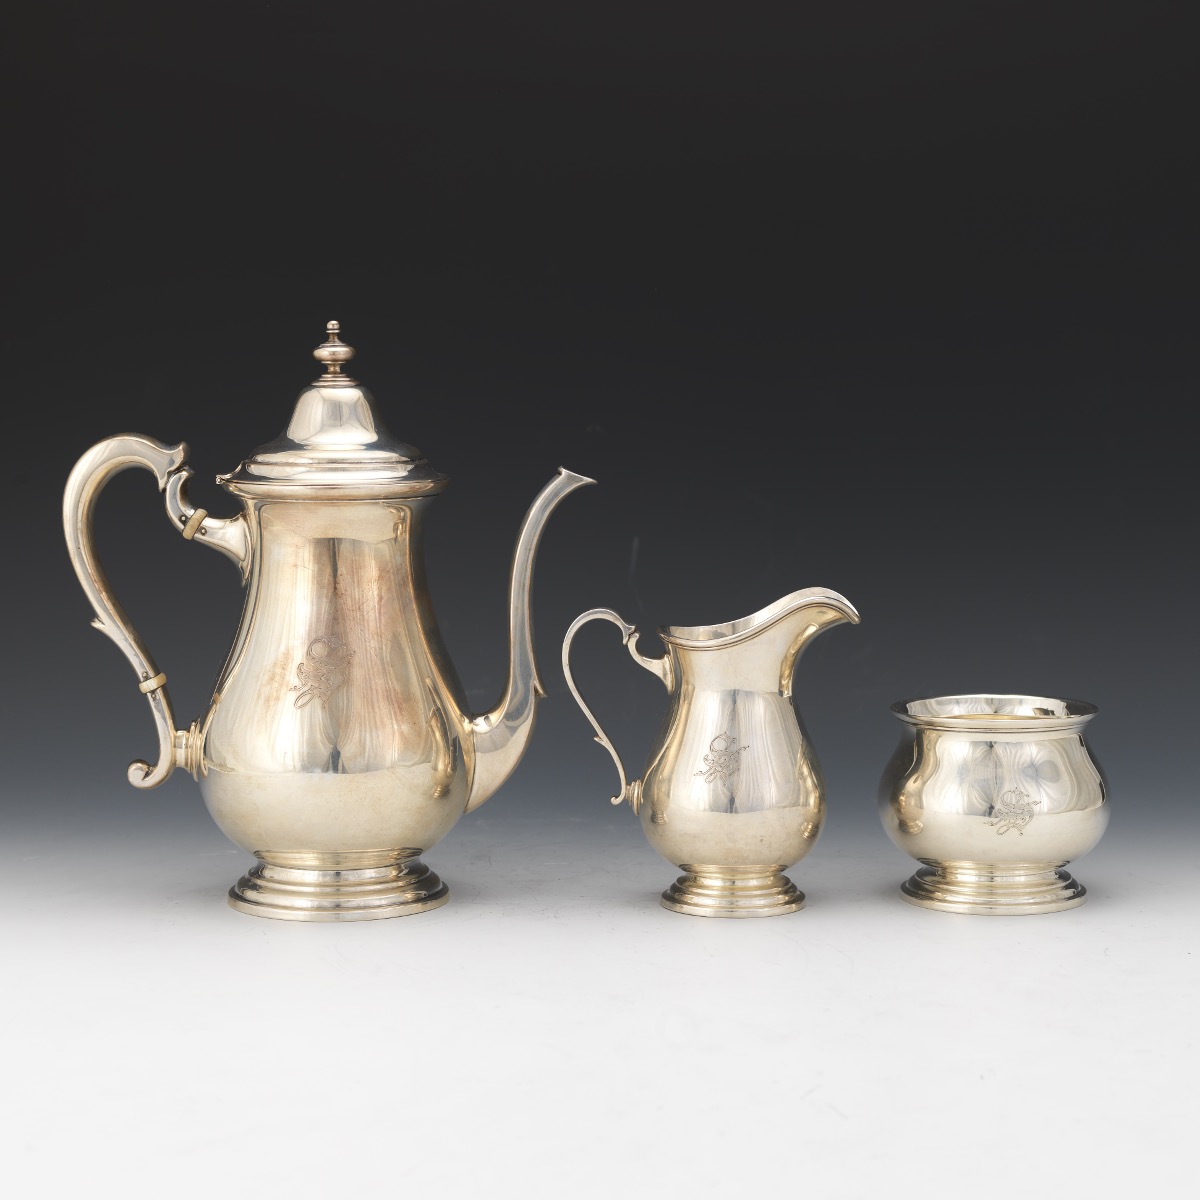 Graff, Washbourne & Dunn Sterling Silver Tea and Coffee Service - Image 8 of 20